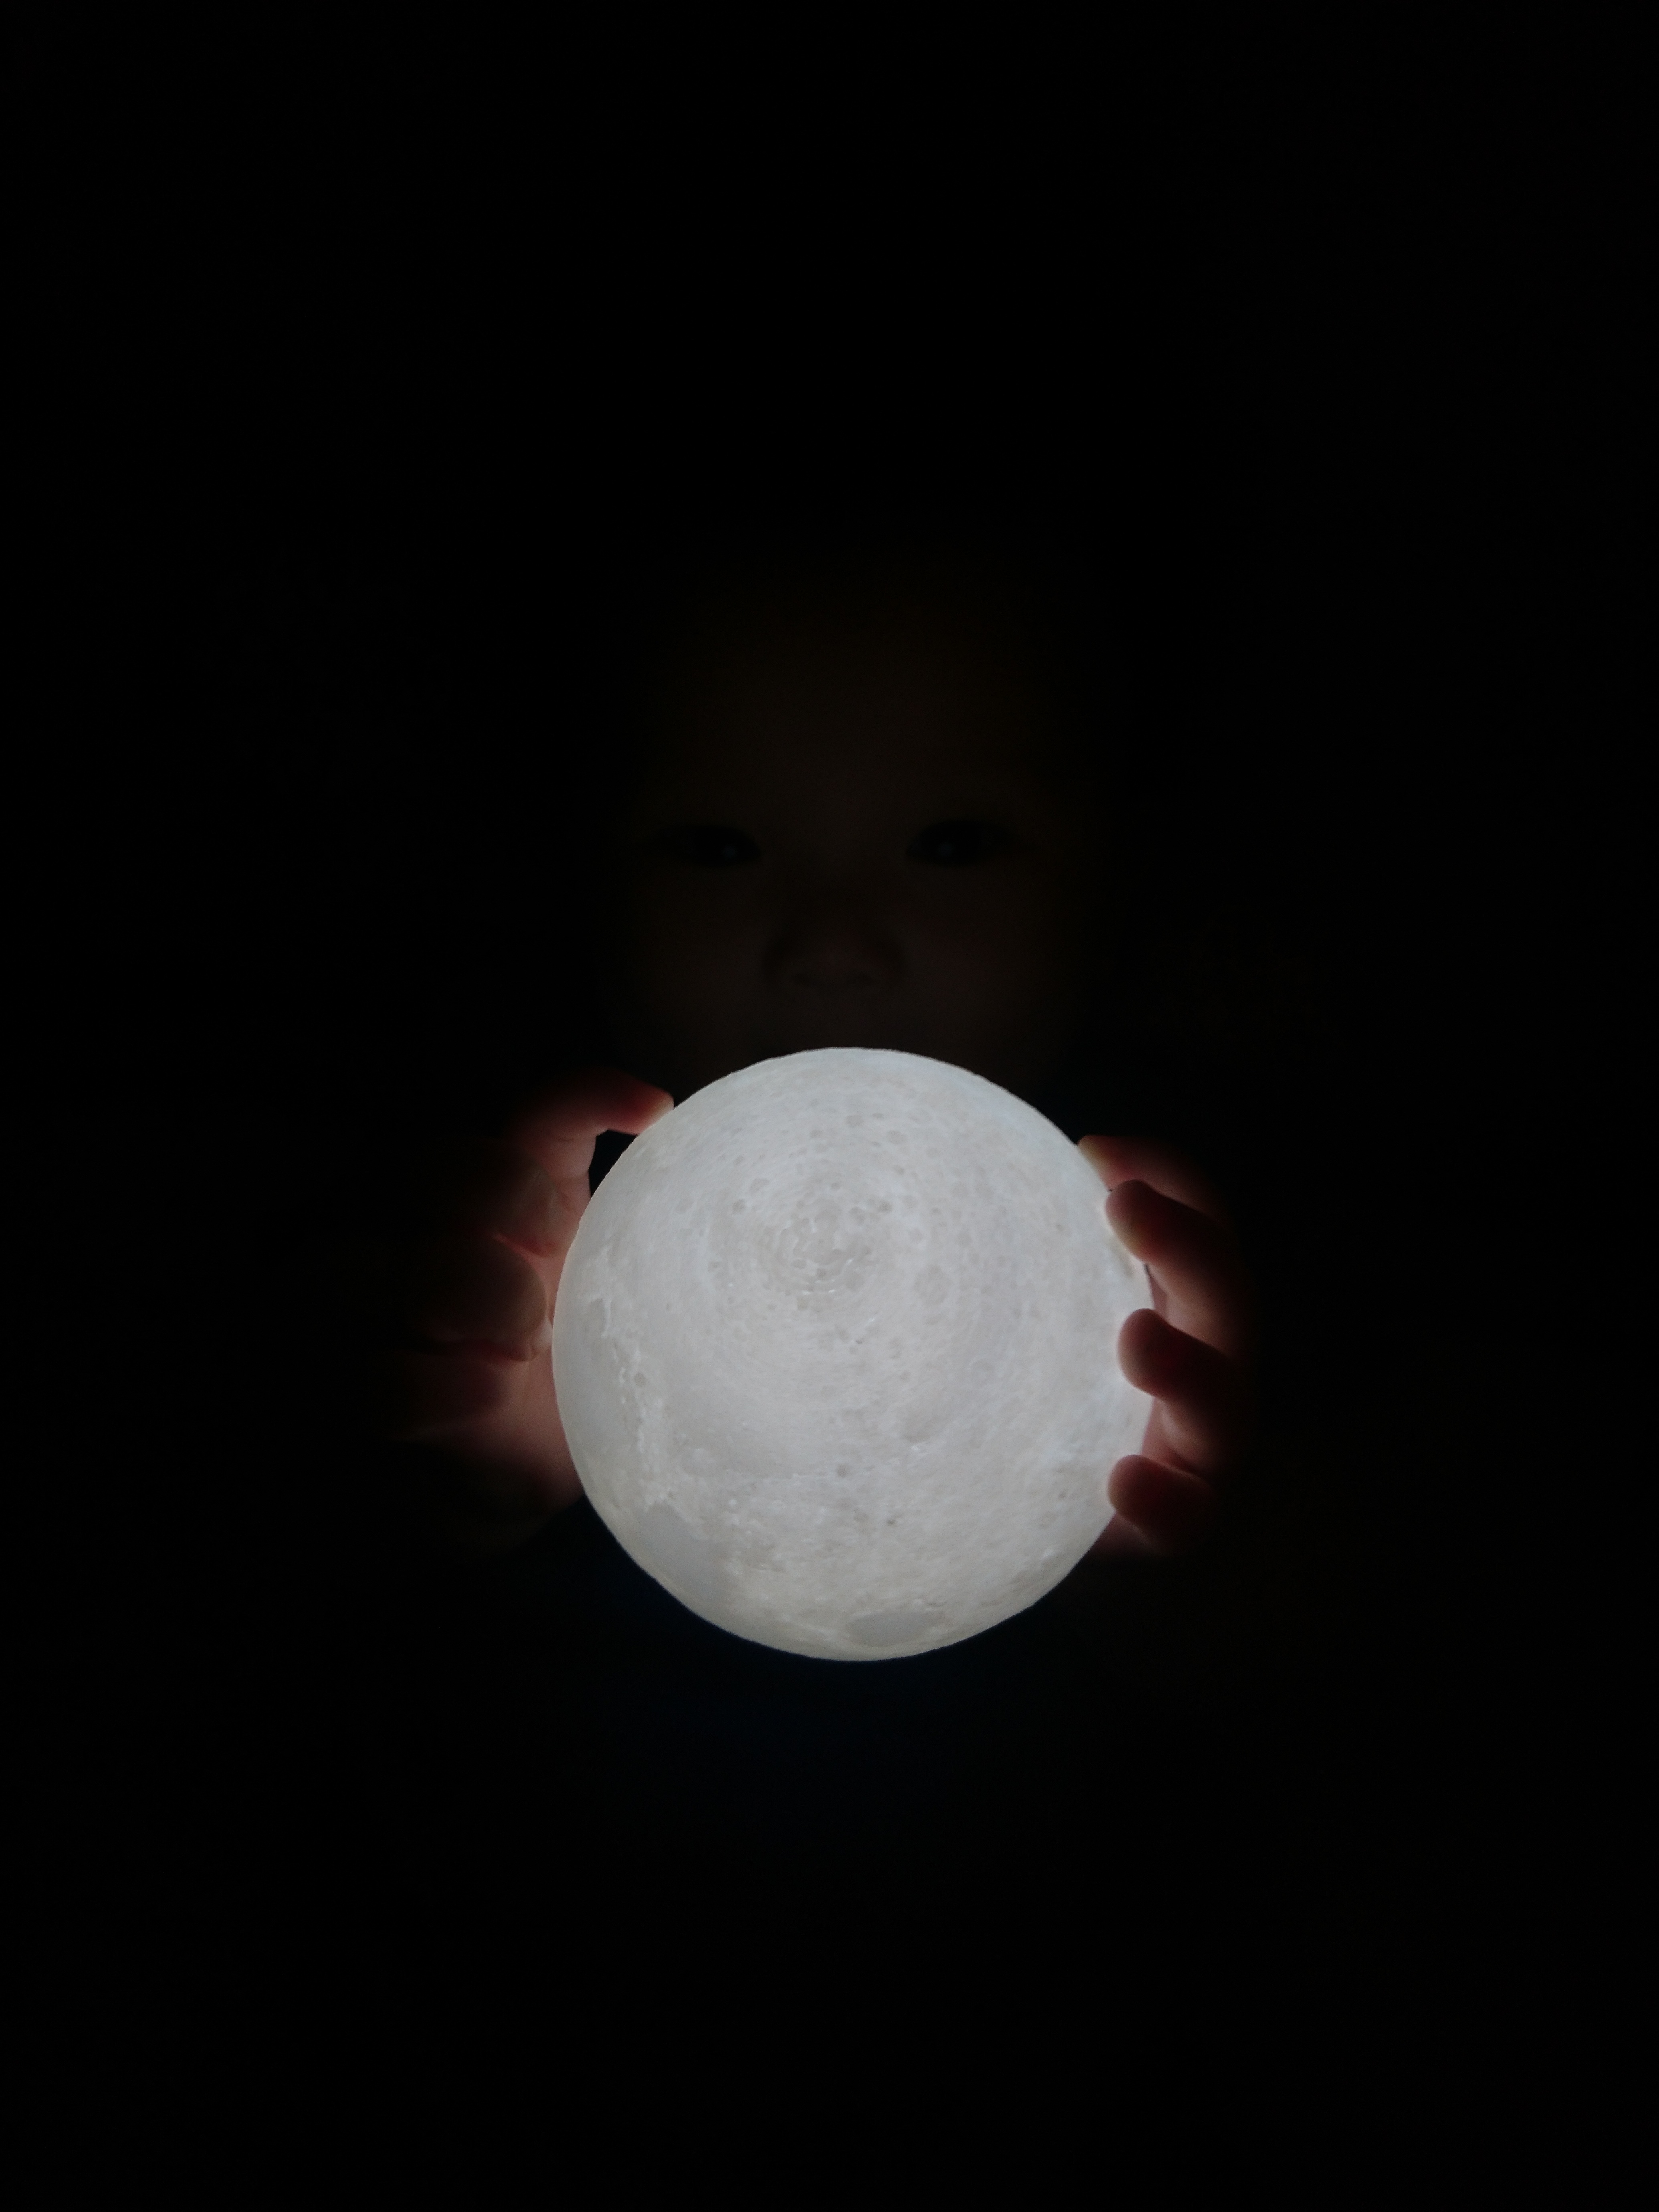 child, hands, glow, dark, moon, ball wallpapers for tablet